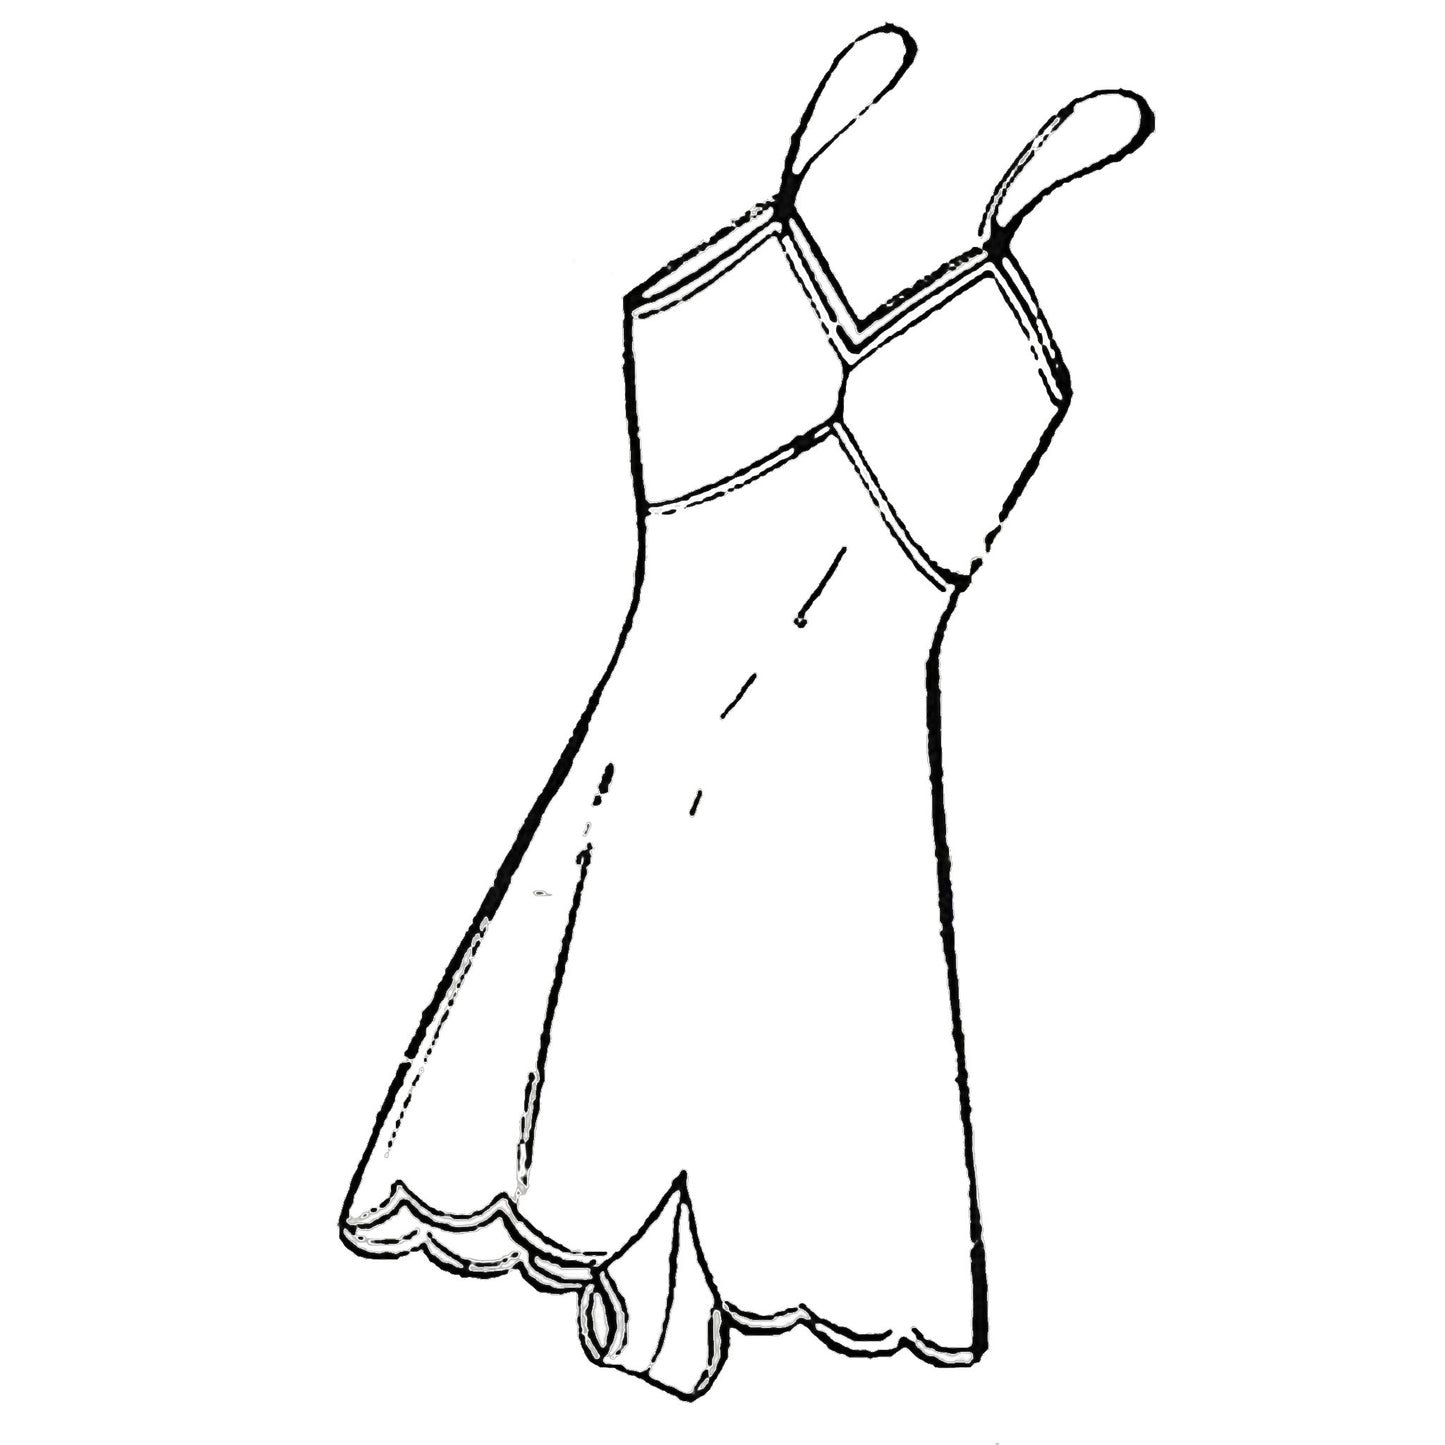 Outline drawing of 1940s lingerie made from Style 4643 pattern